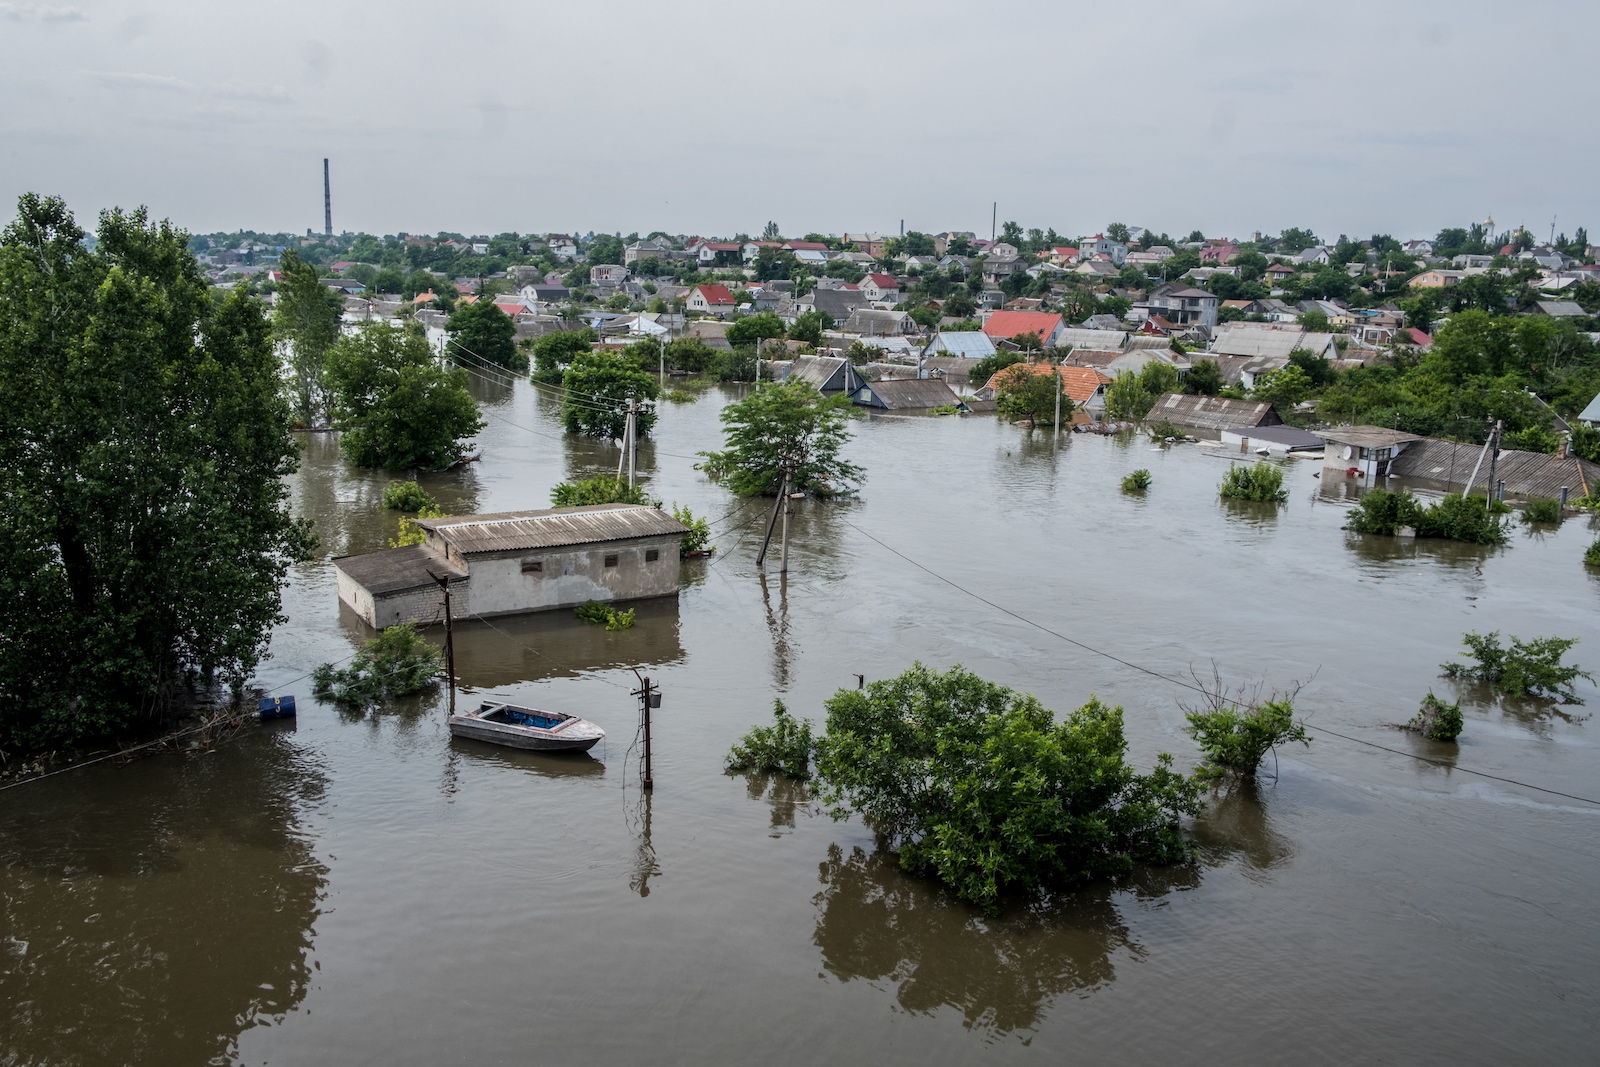 epa10678563 A general view shows a flooded area of Kherson, Ukraine, 07 June 2023. Ukraine has accused Russian forces of destroying a critical dam and hydroelectric power plant on the Dnipro River in the Kherson region along the front line in southern Ukraine on 06 June. A number of settlements were completely or partially flooded, Kherson region governor Oleksandr Prokudin said on telegram. Russian troops entered Ukraine in February 2022 starting a conflict that has provoked destruction and a humanitarian crisis.  EPA/GEORGE IVANCHENKO